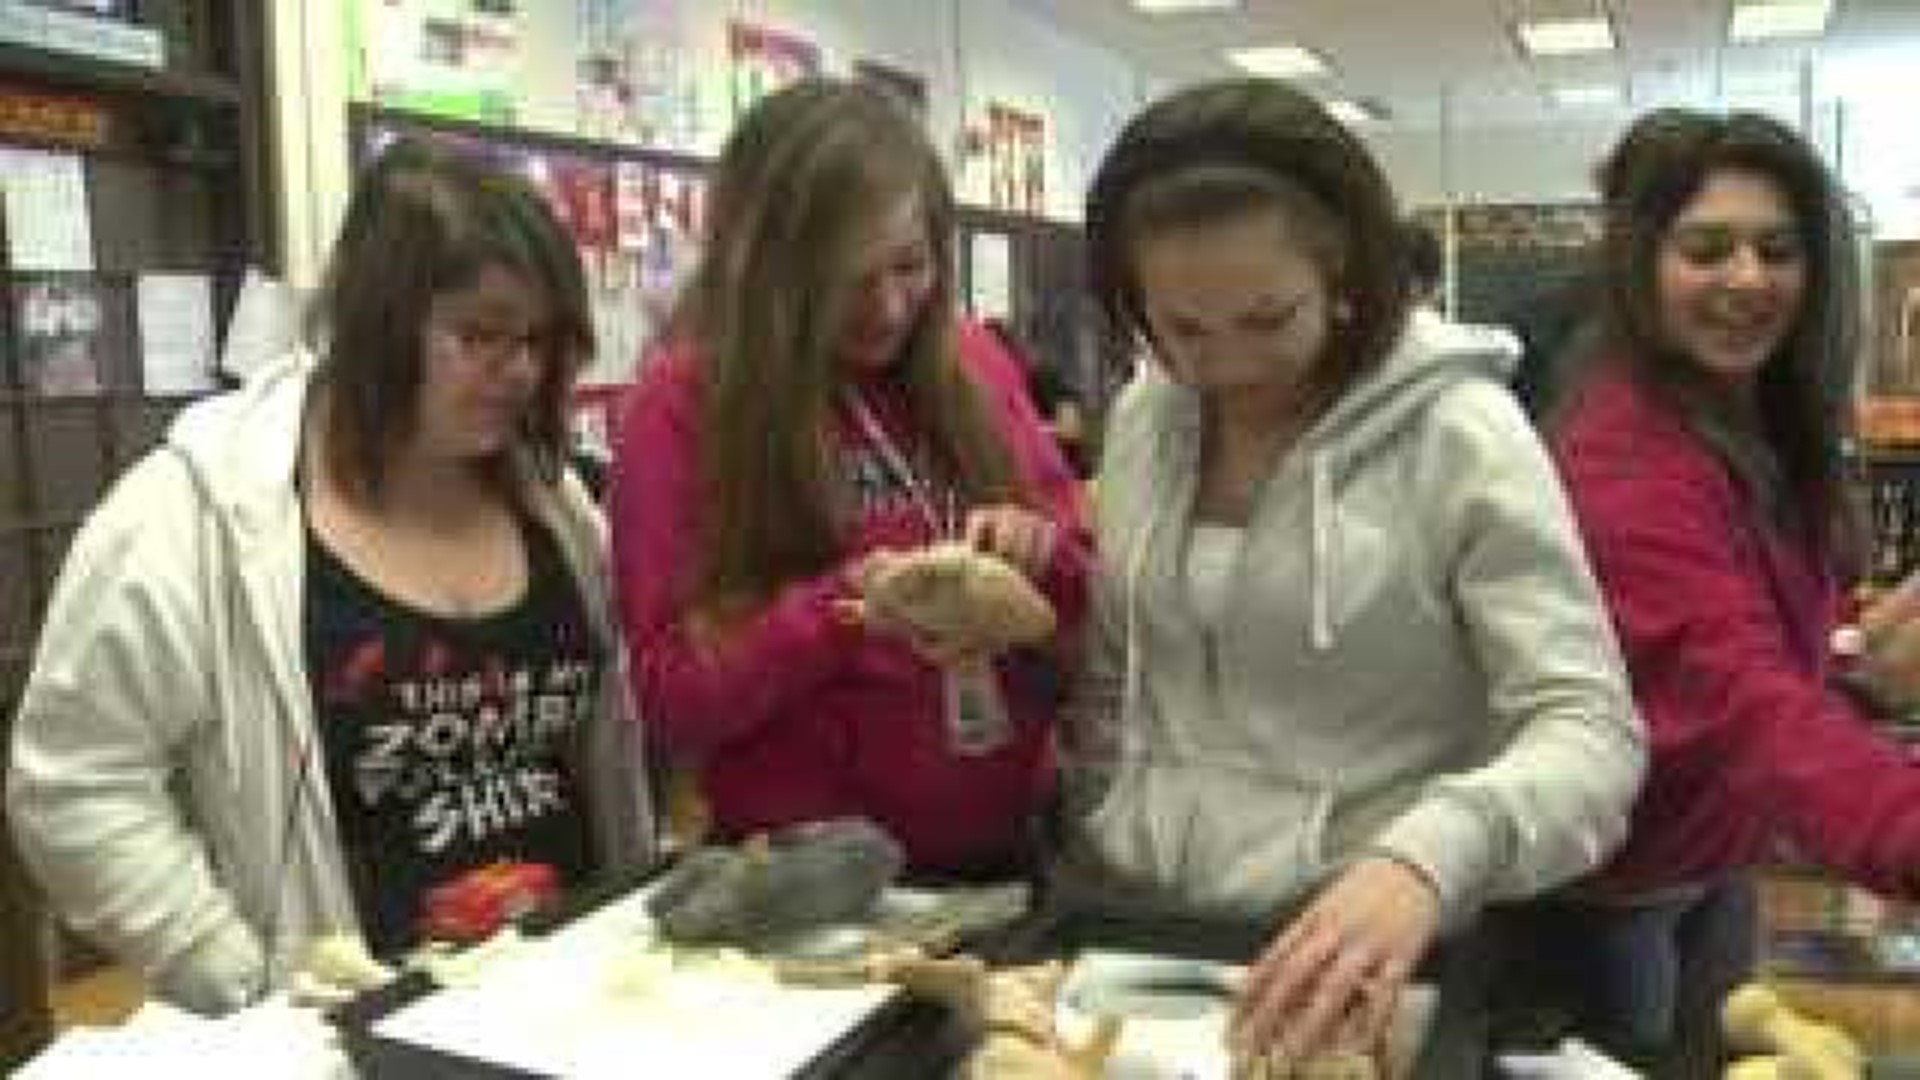 Rocky anatomy students hold real brain, heart, lung